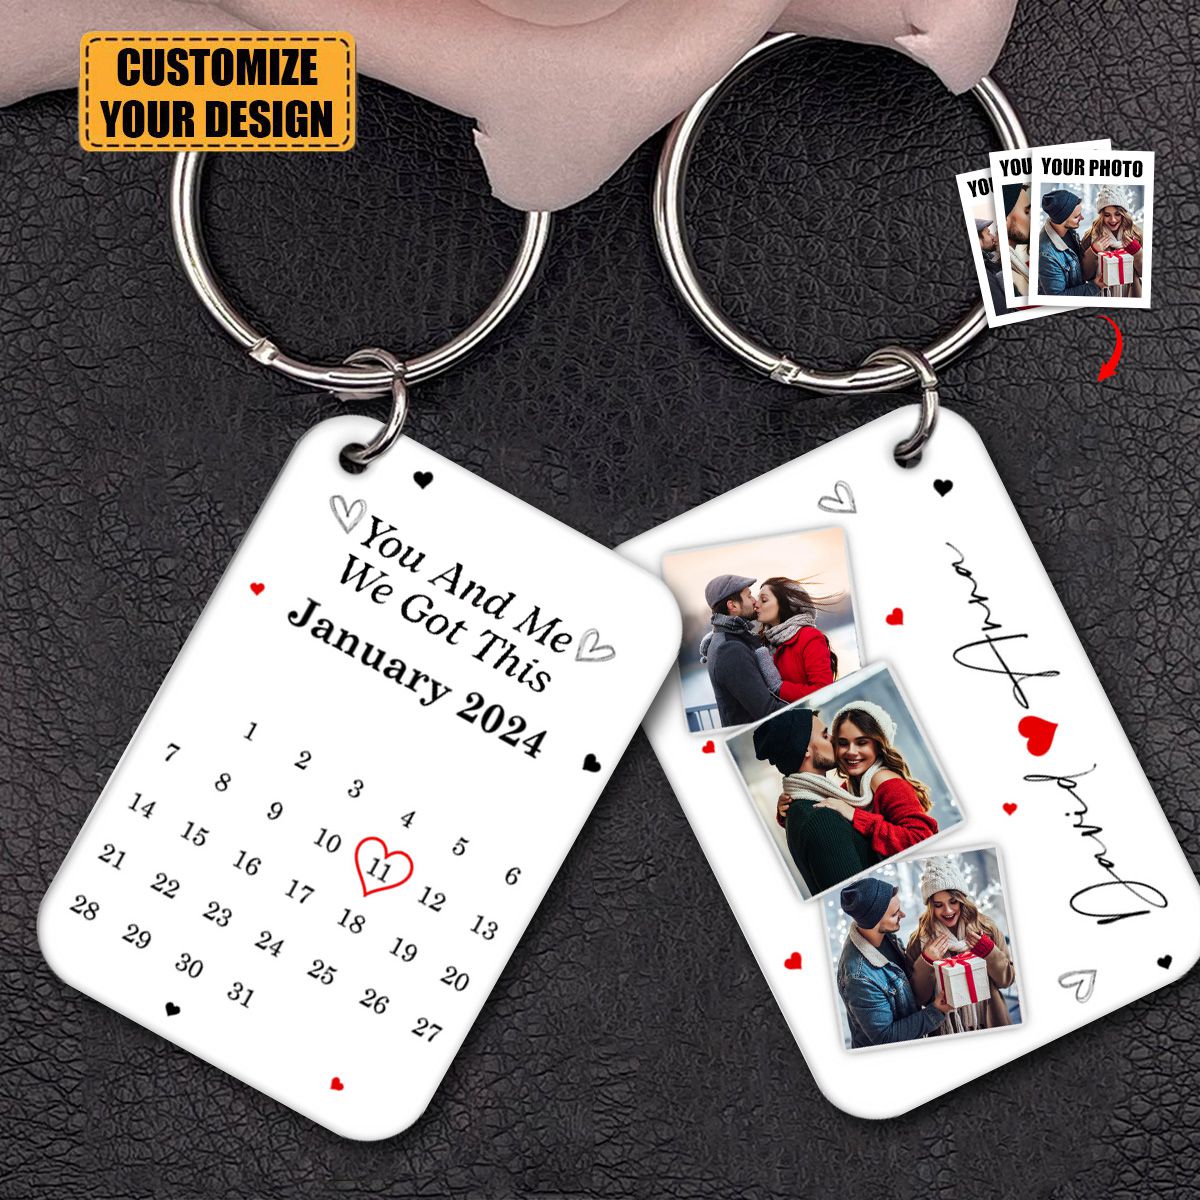 Custom Photo Calendar The Day Our Journey Began - Gift For Couples - Personalized Acrylic Keychain